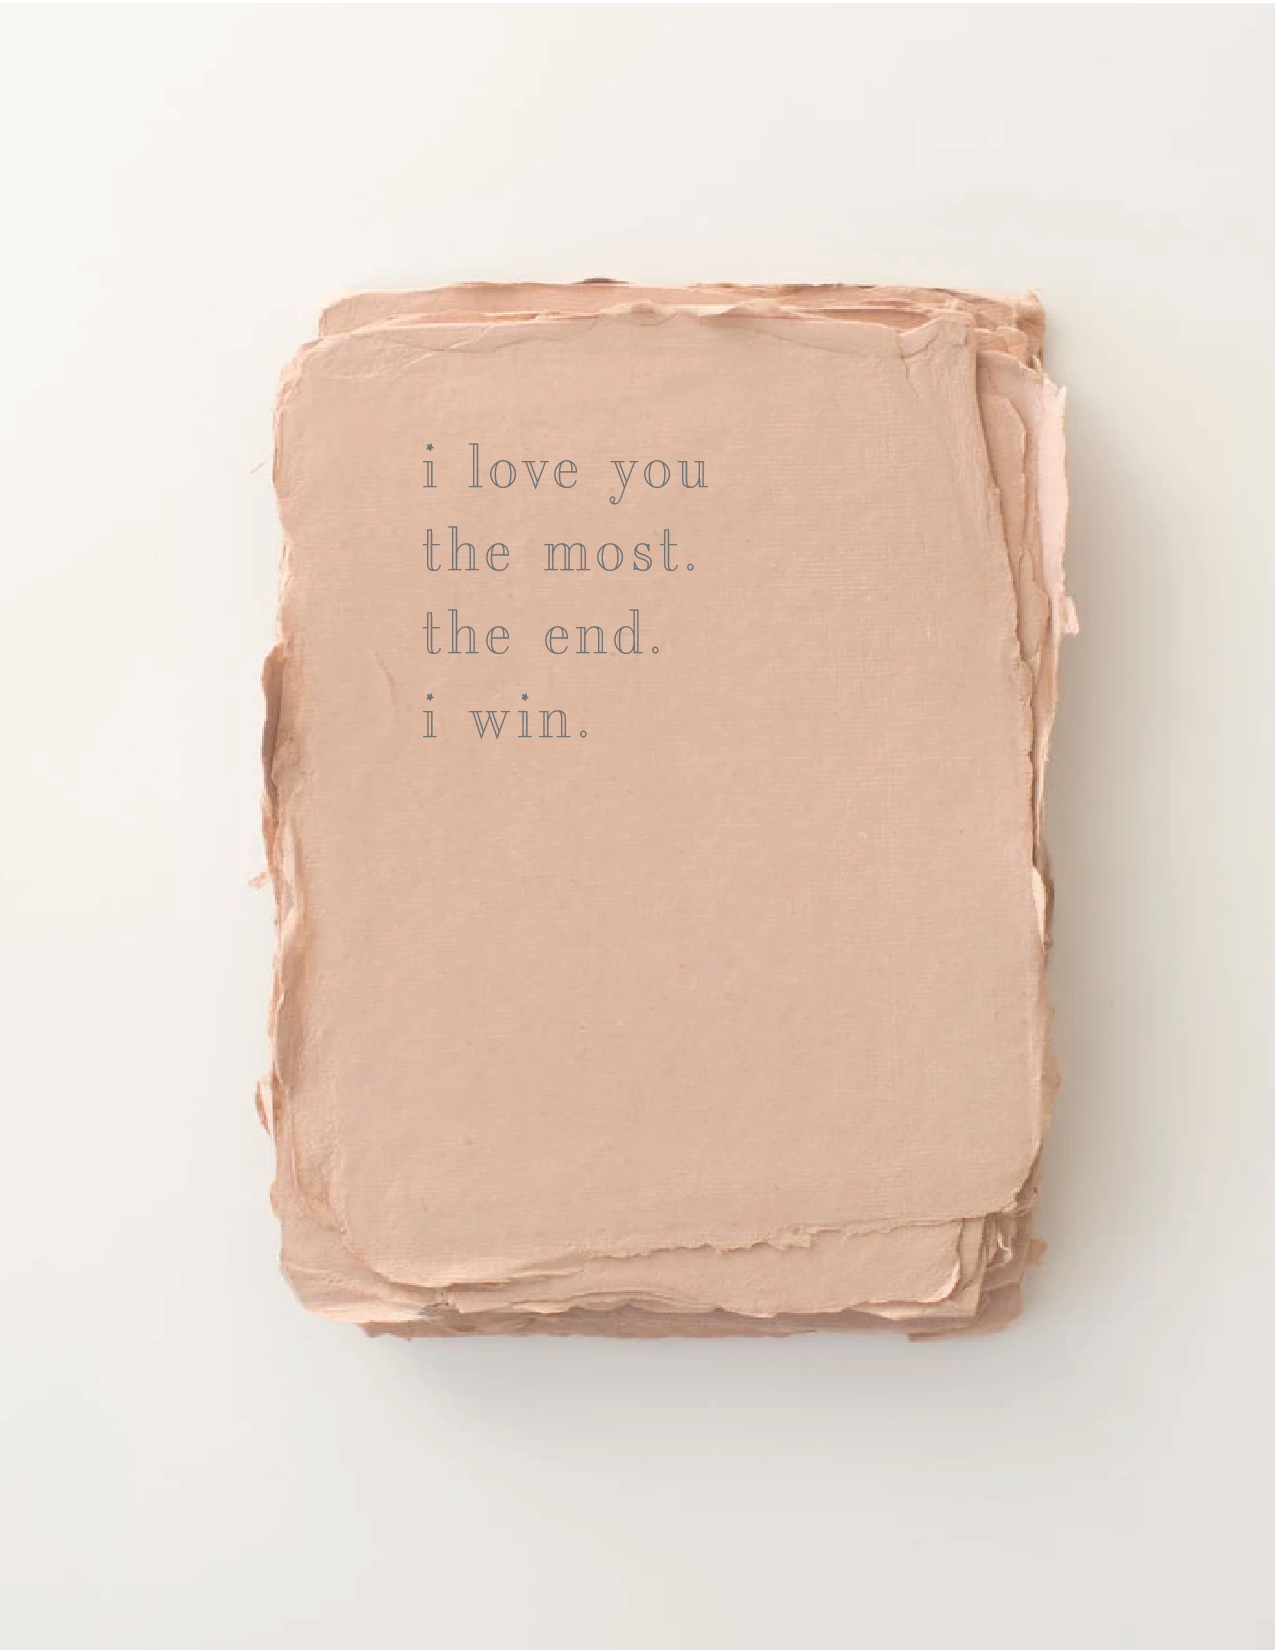 "Love you the Most" Letterpress Love Greeting Card - White Street Market